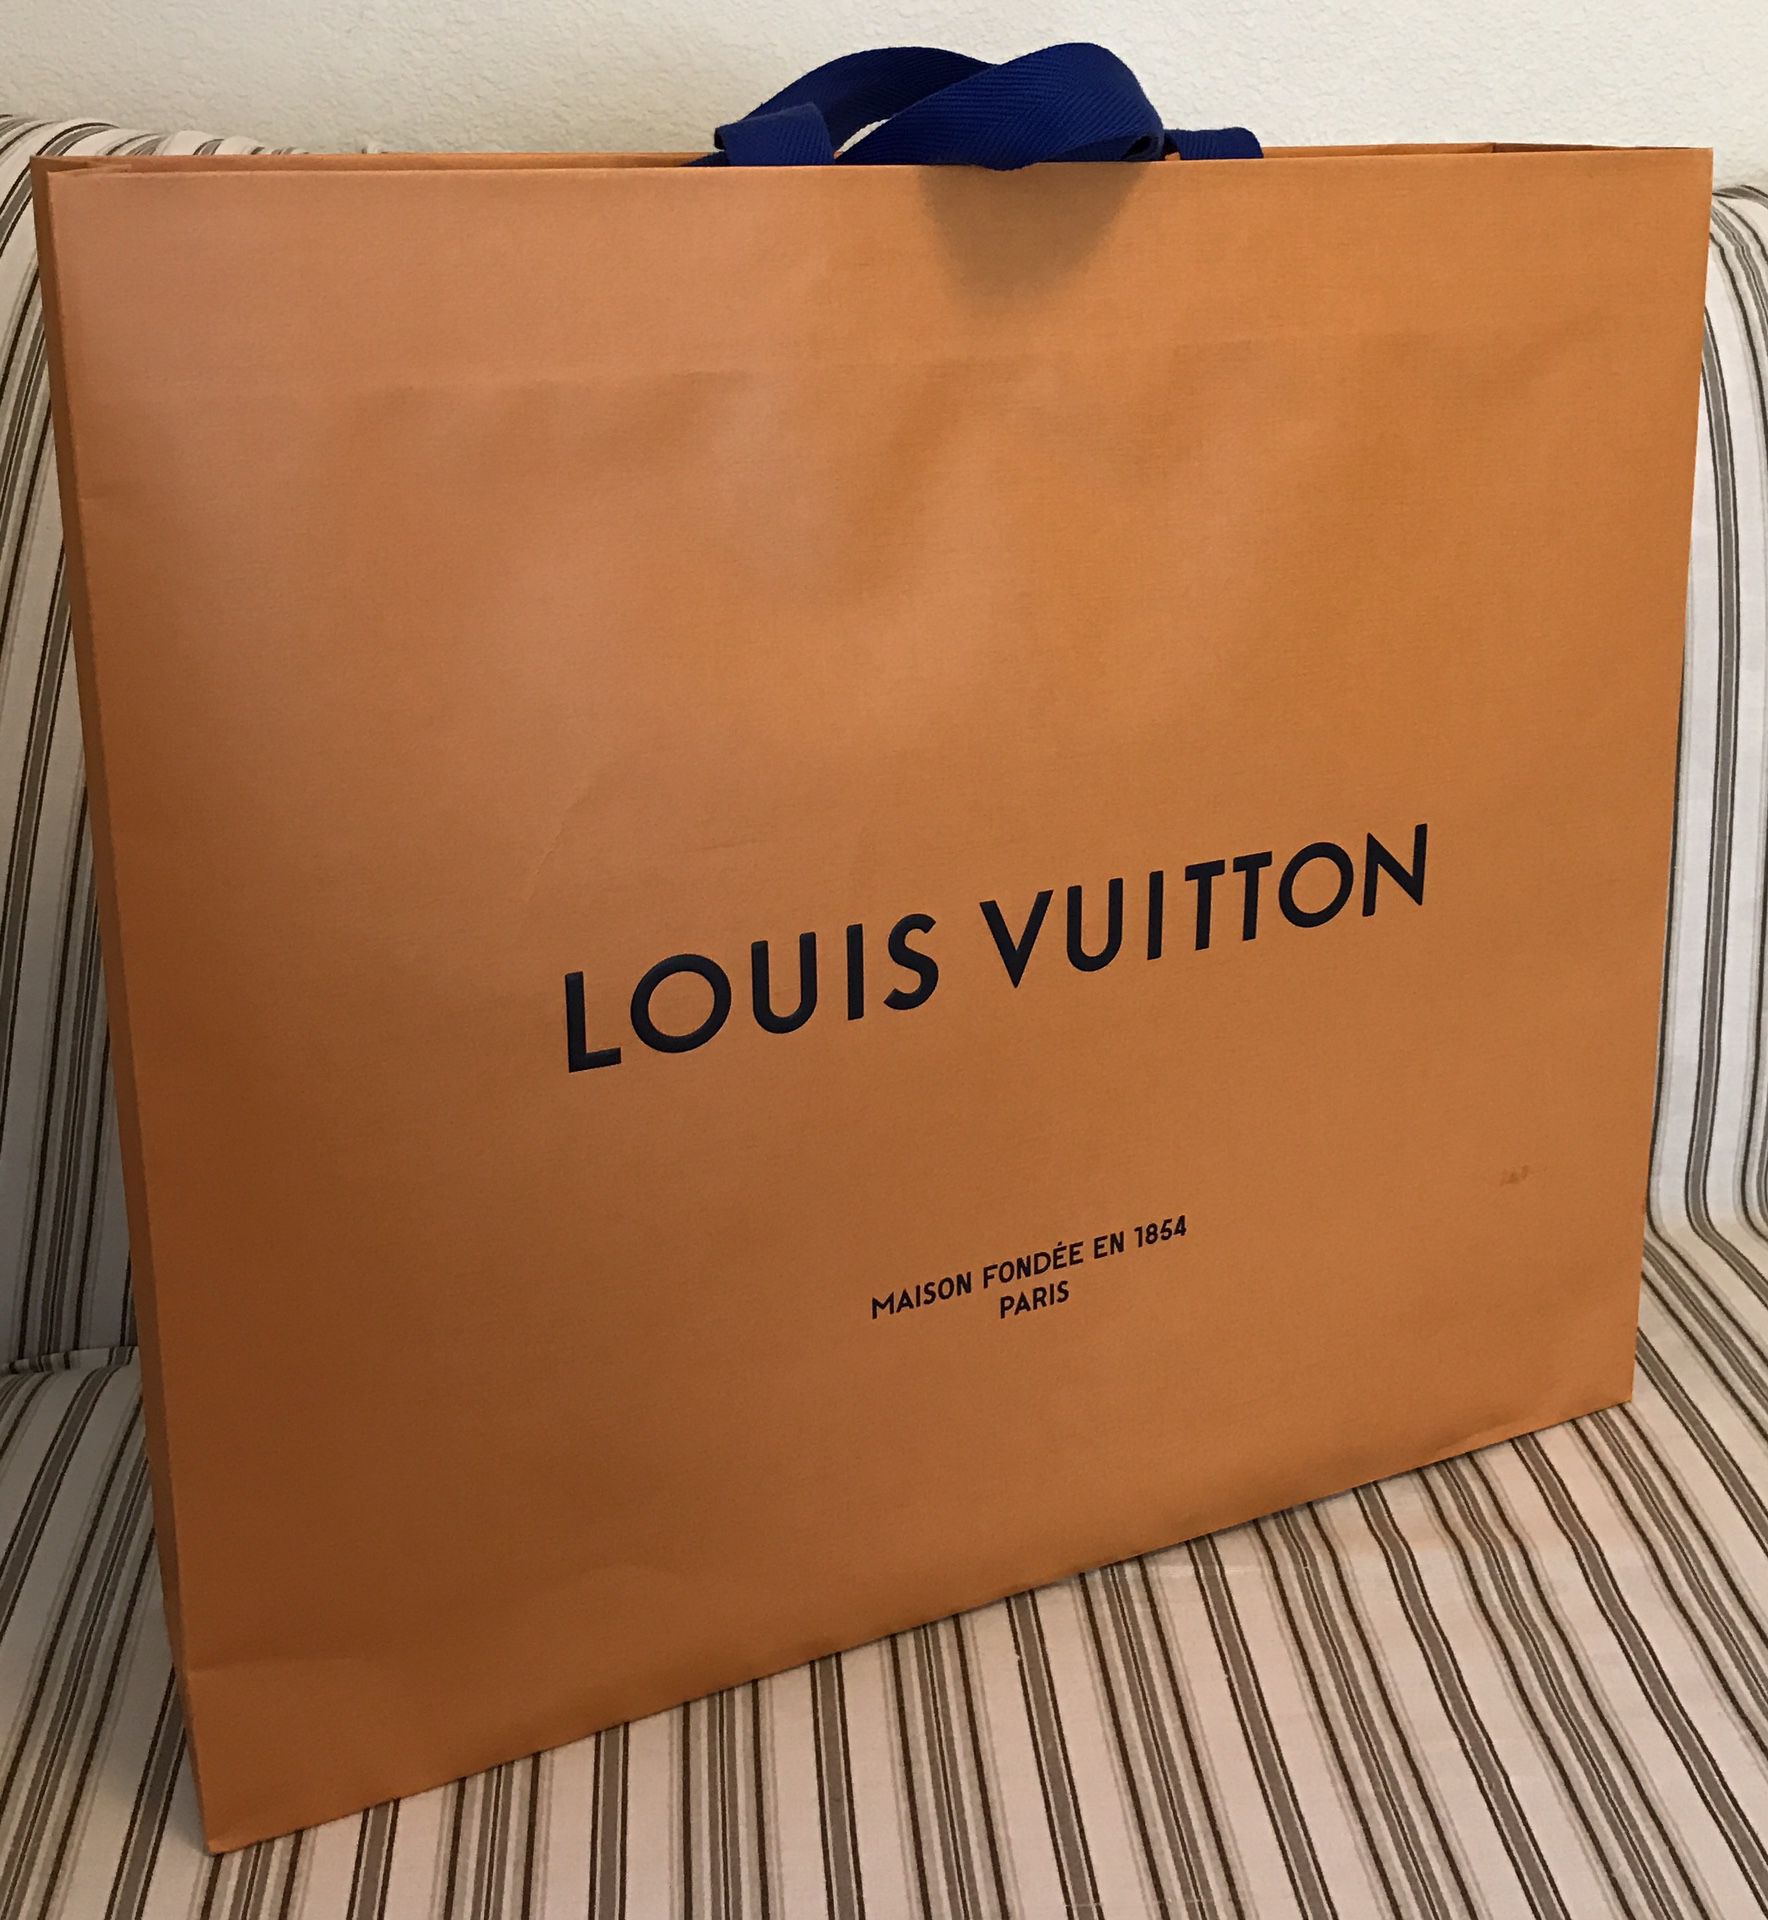 Authentic Louis Vuitton Box with Paper Bag and Magazines